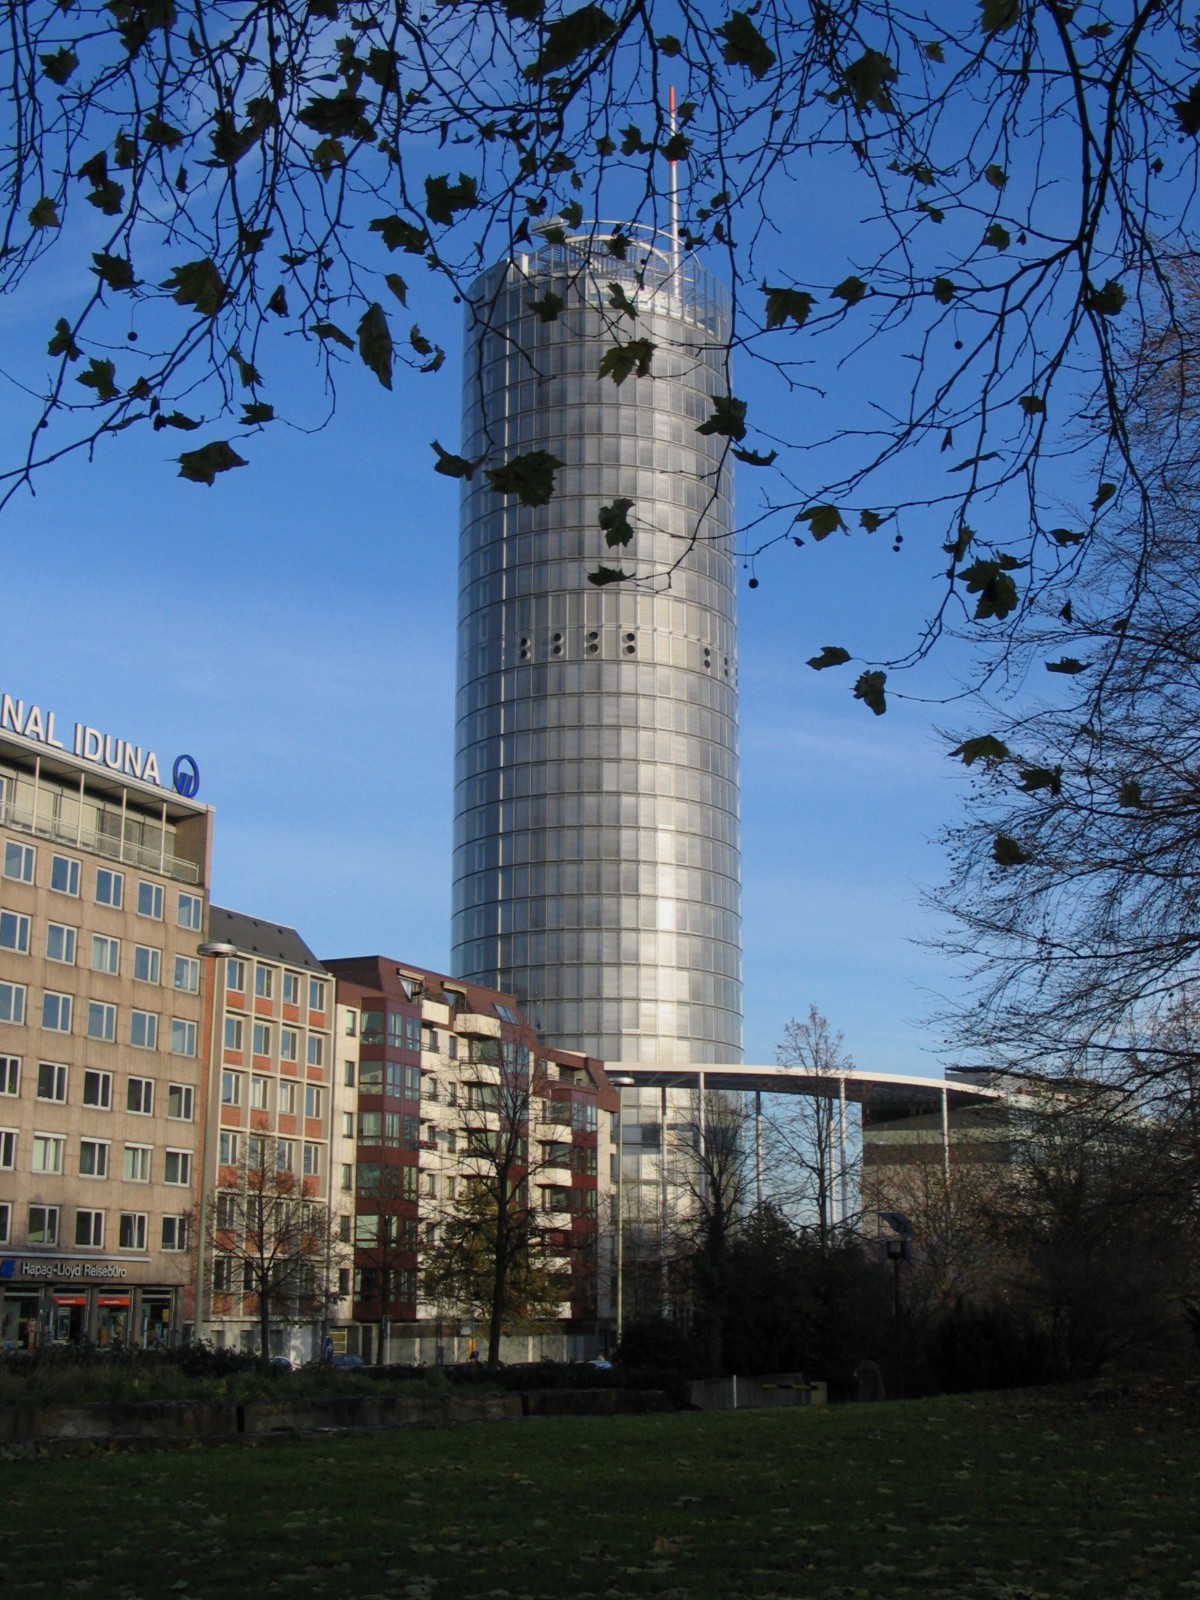 the RWE tower